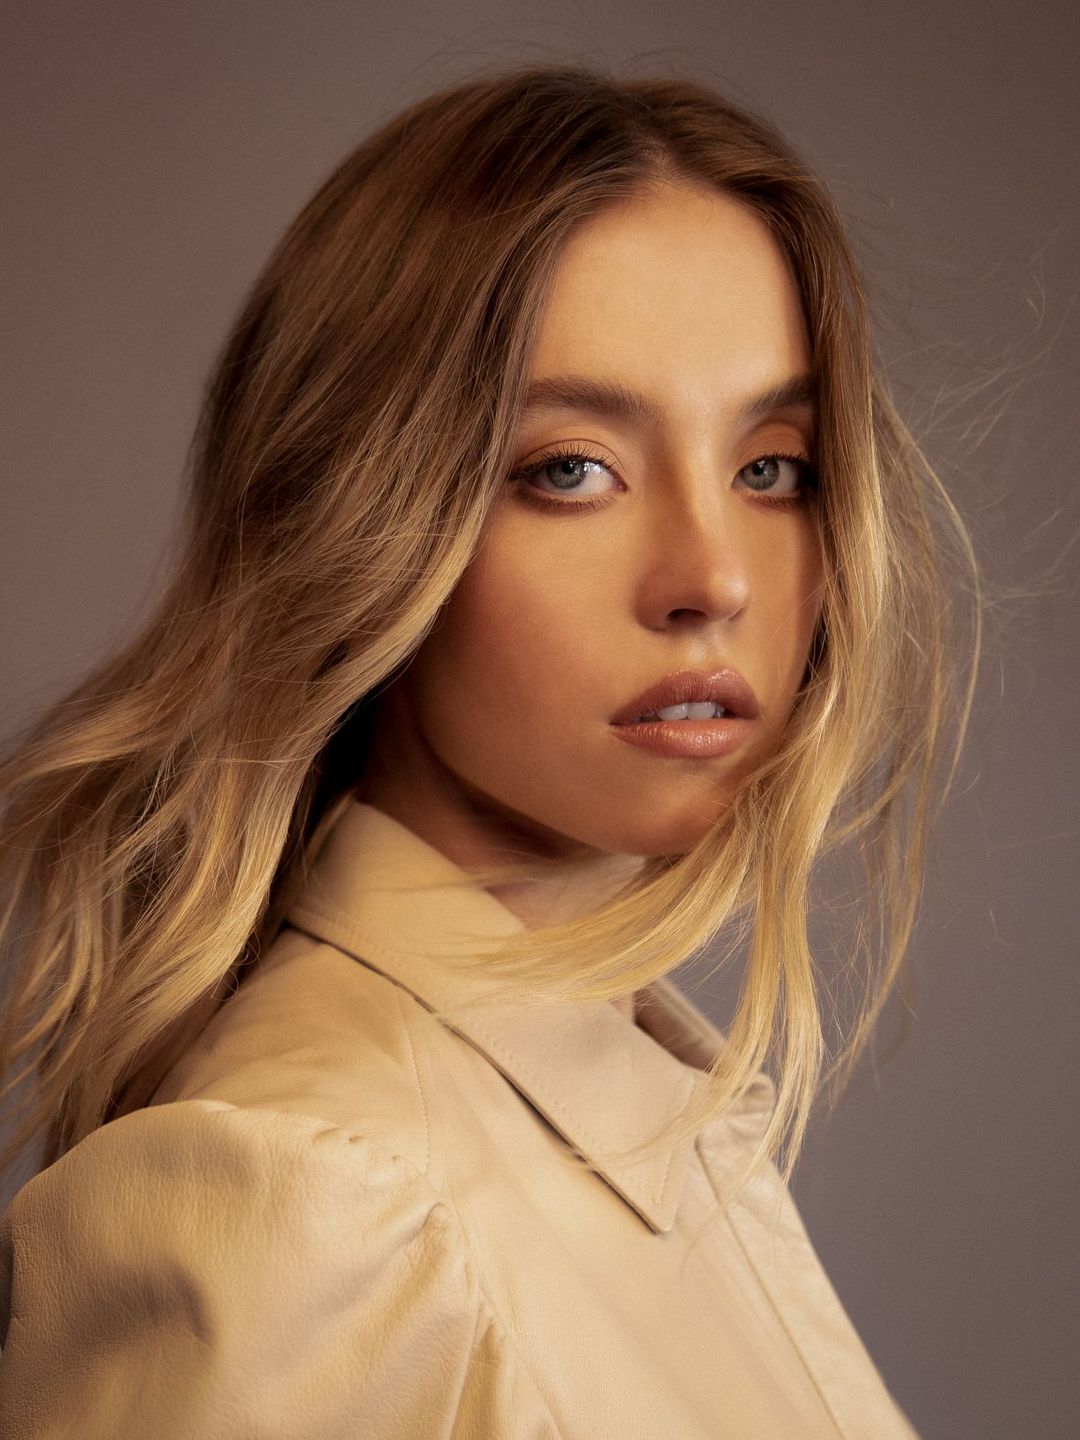 Sydney Sweeney where is she now